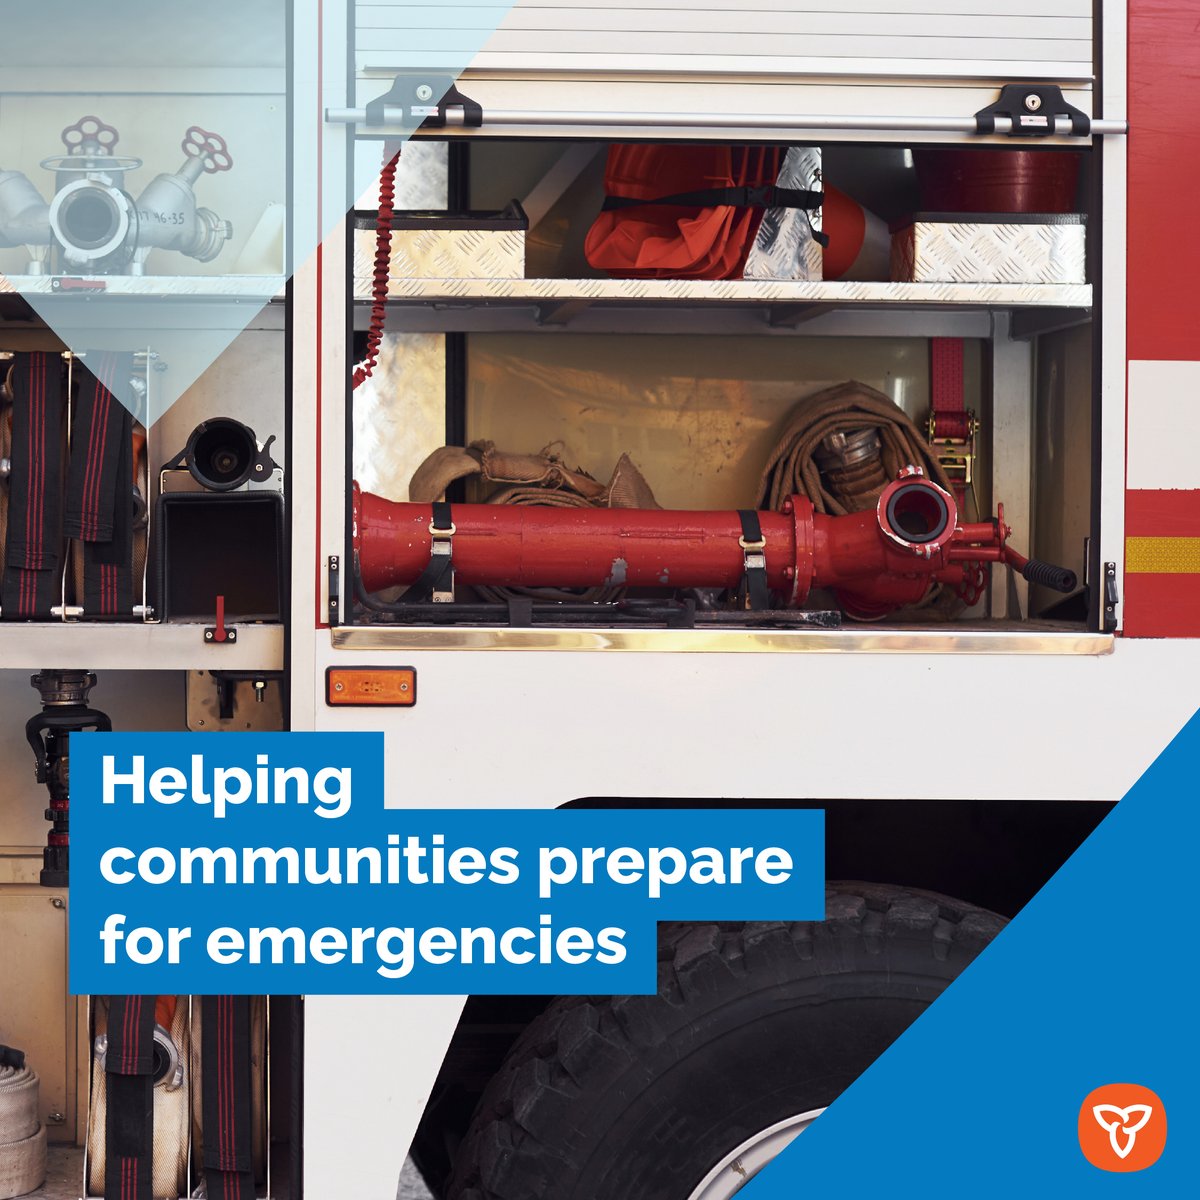 From thermal imaging drones to firefighting equipment, the Community Emergency Preparedness Grant is helping communities and organizations purchase critical supplies and equipment to help them prepare and respond to emergencies. Learn more: ontario.ca/EmergencyGrant